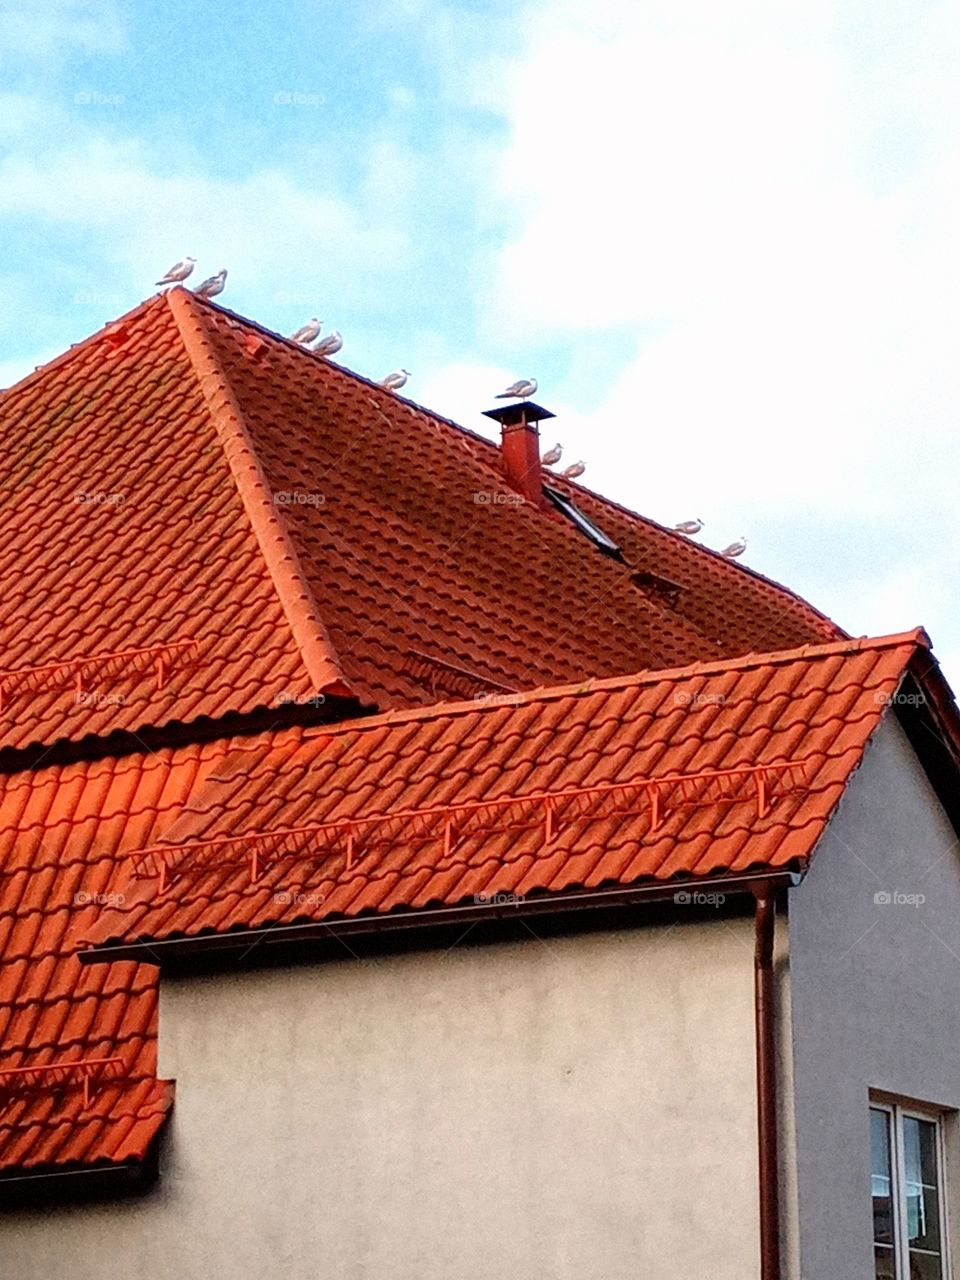 Roof and gulls